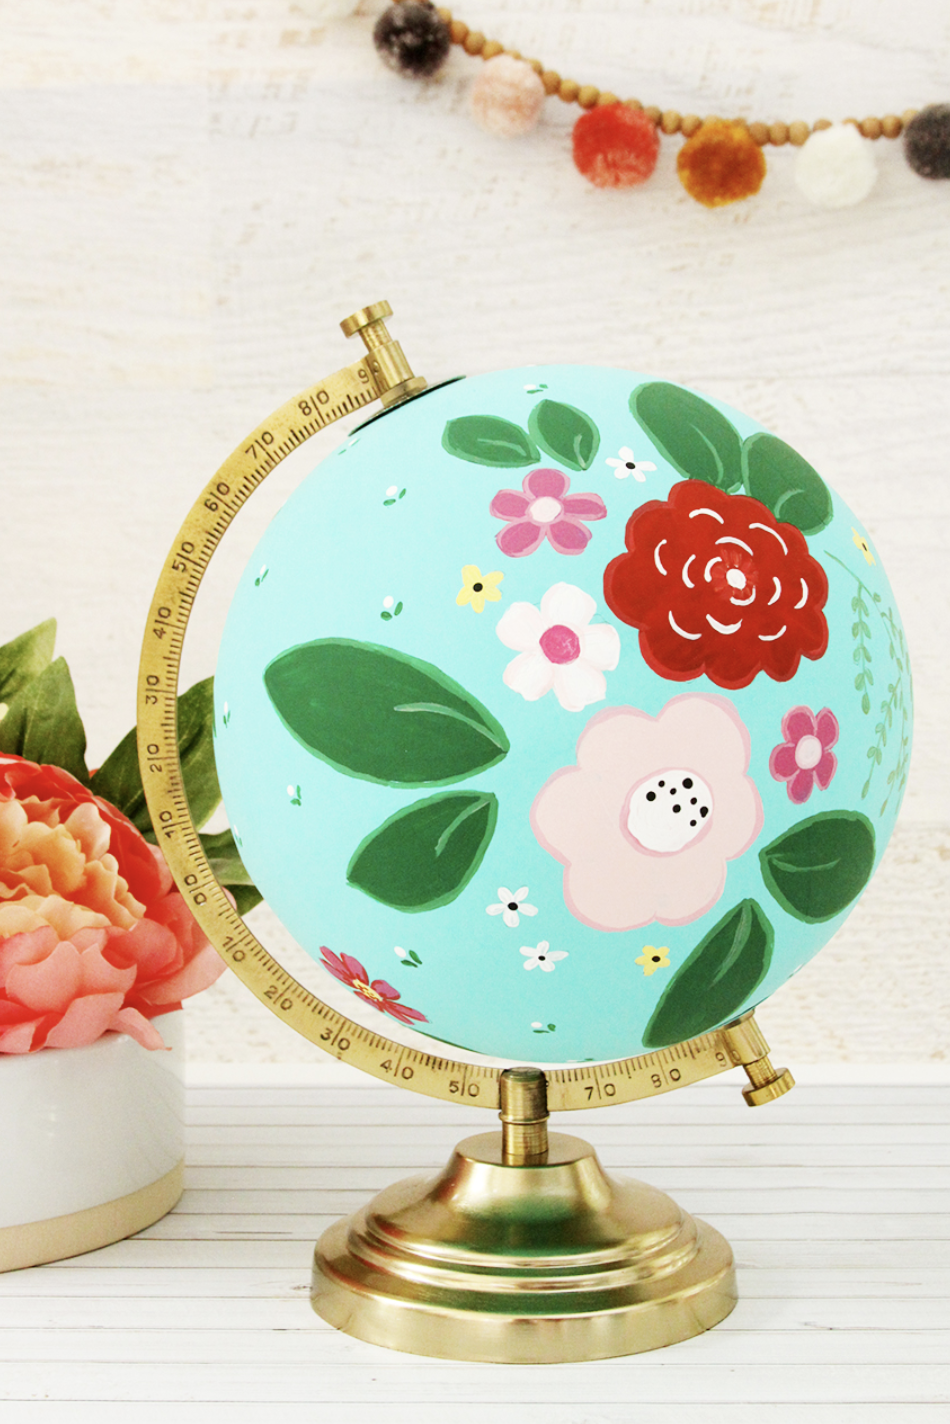 Earth Day crafts, a globe with a floral pattern on a table next to a small white vase